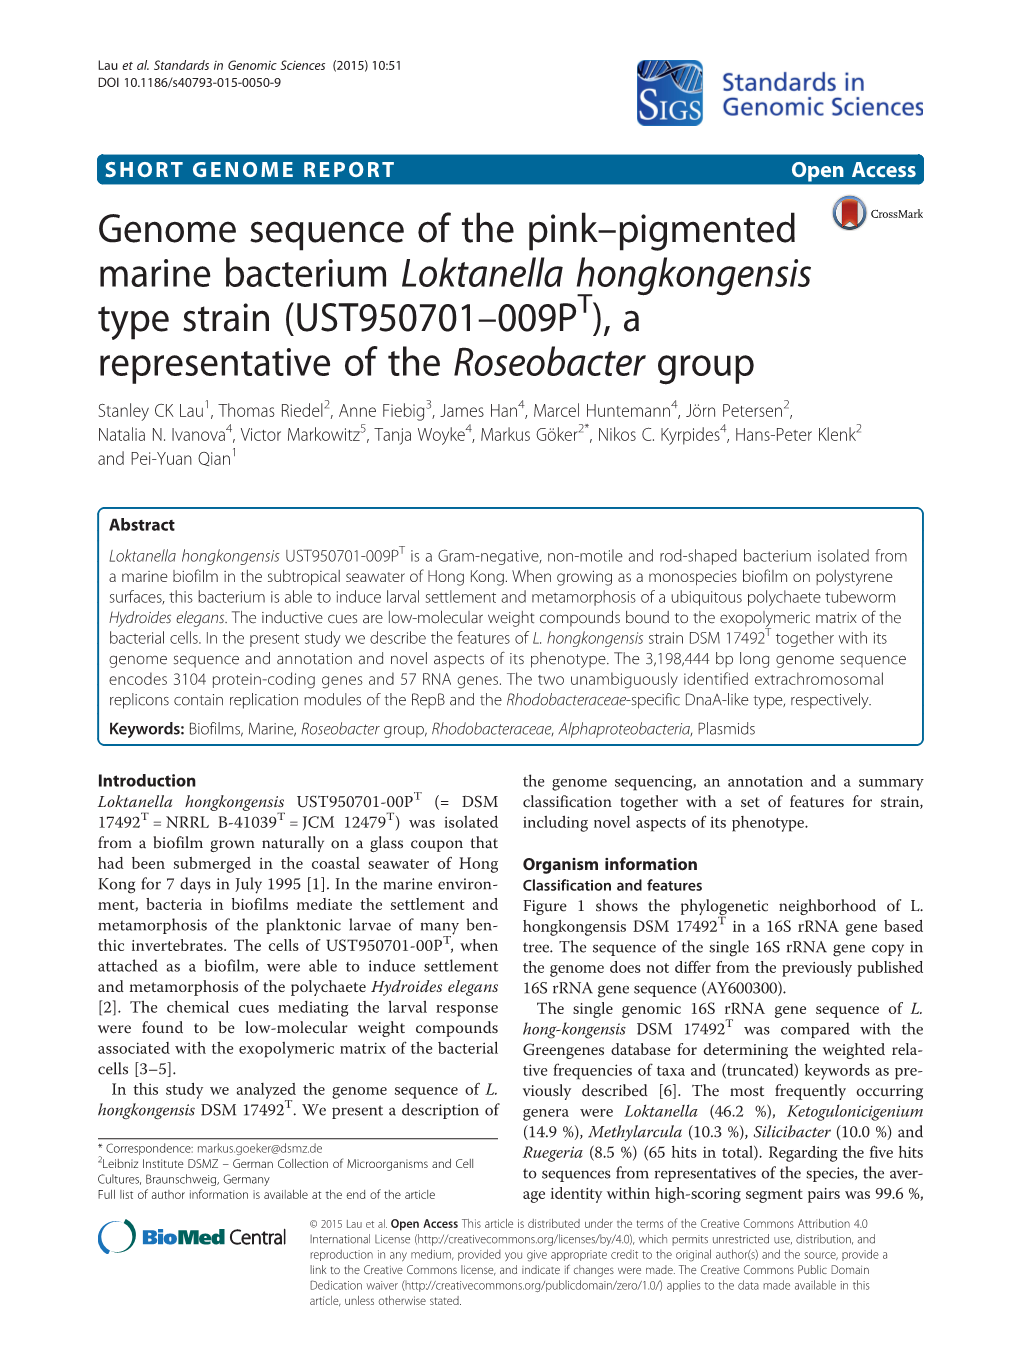 Genome Sequence of the Pink–Pigmented Marine